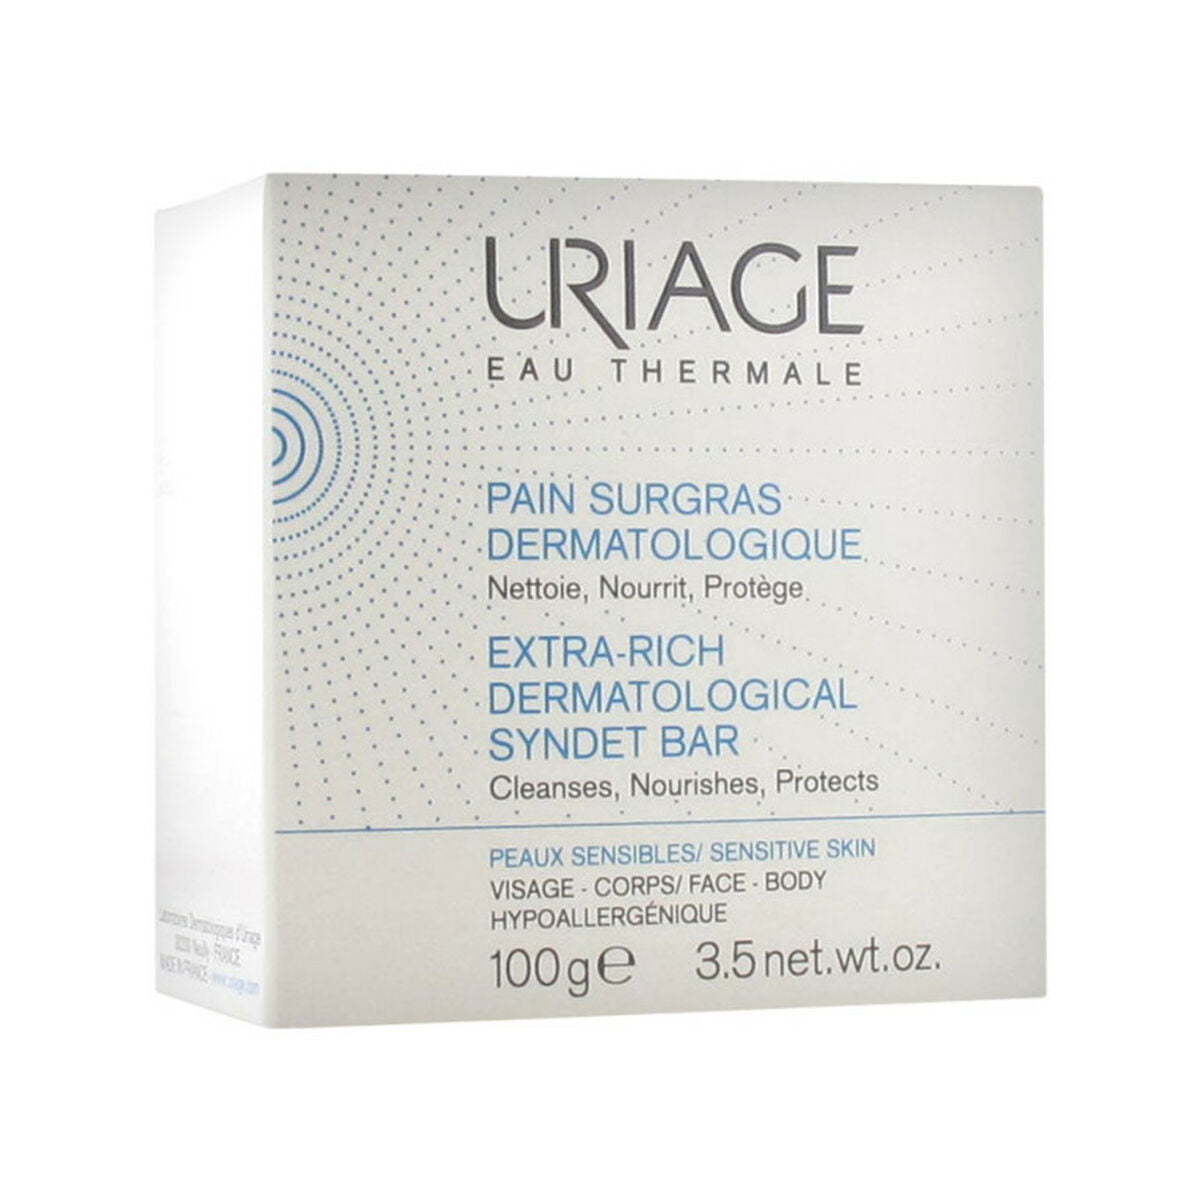 Cleaner Uriage Pan Surgras 100 g Dermatological Cleansing Bar | Uriage | Aylal Beauty